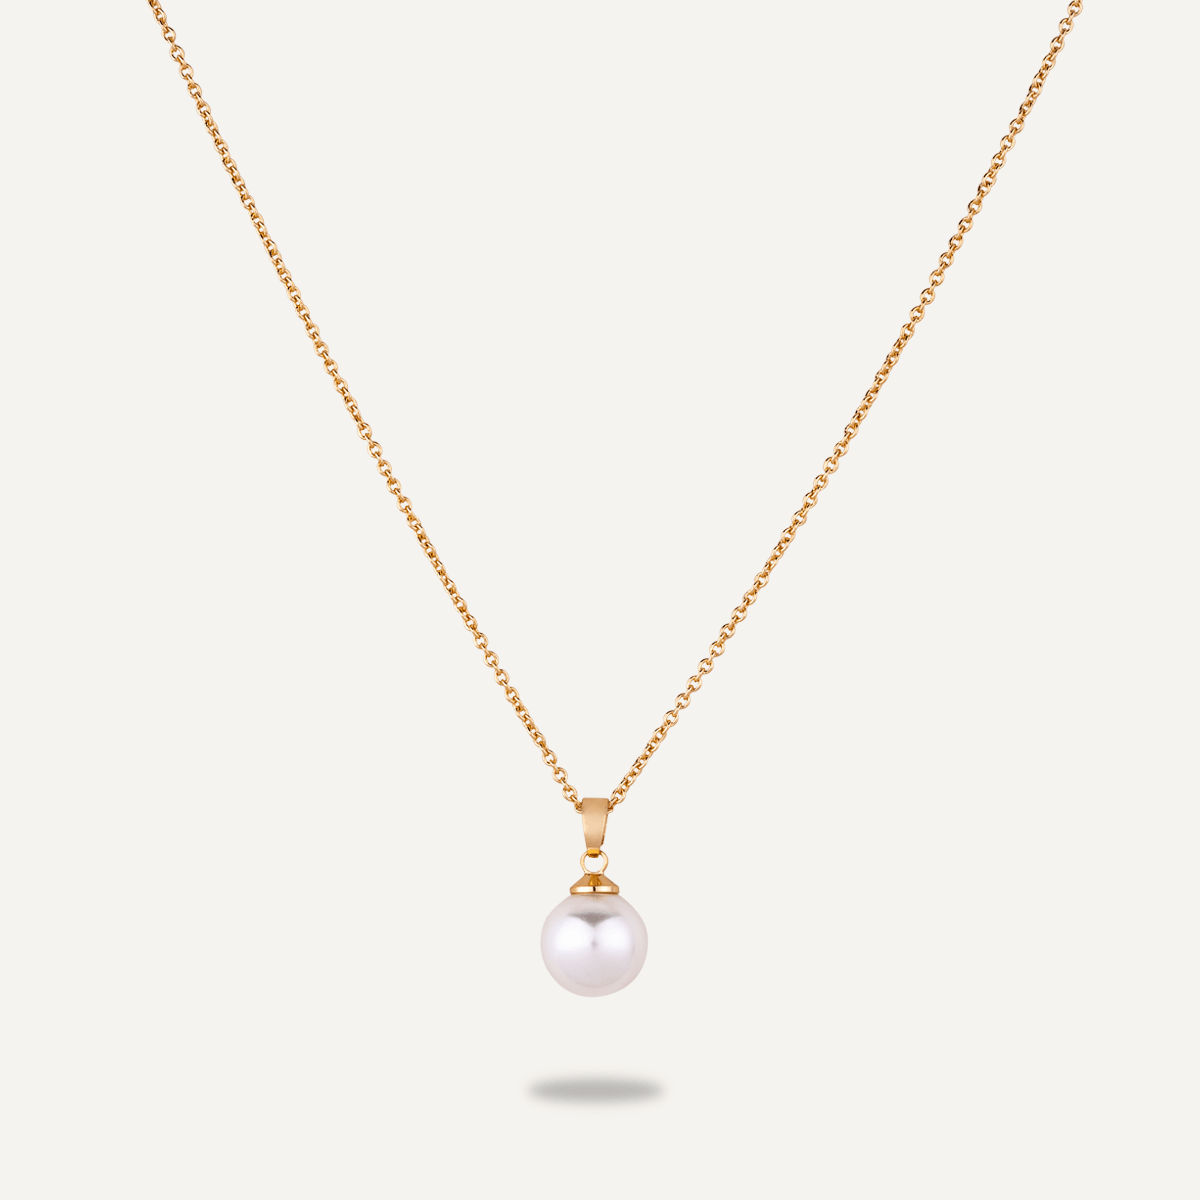 Gold Chain With A Mother Of Pearl Pendant - D&X Retail